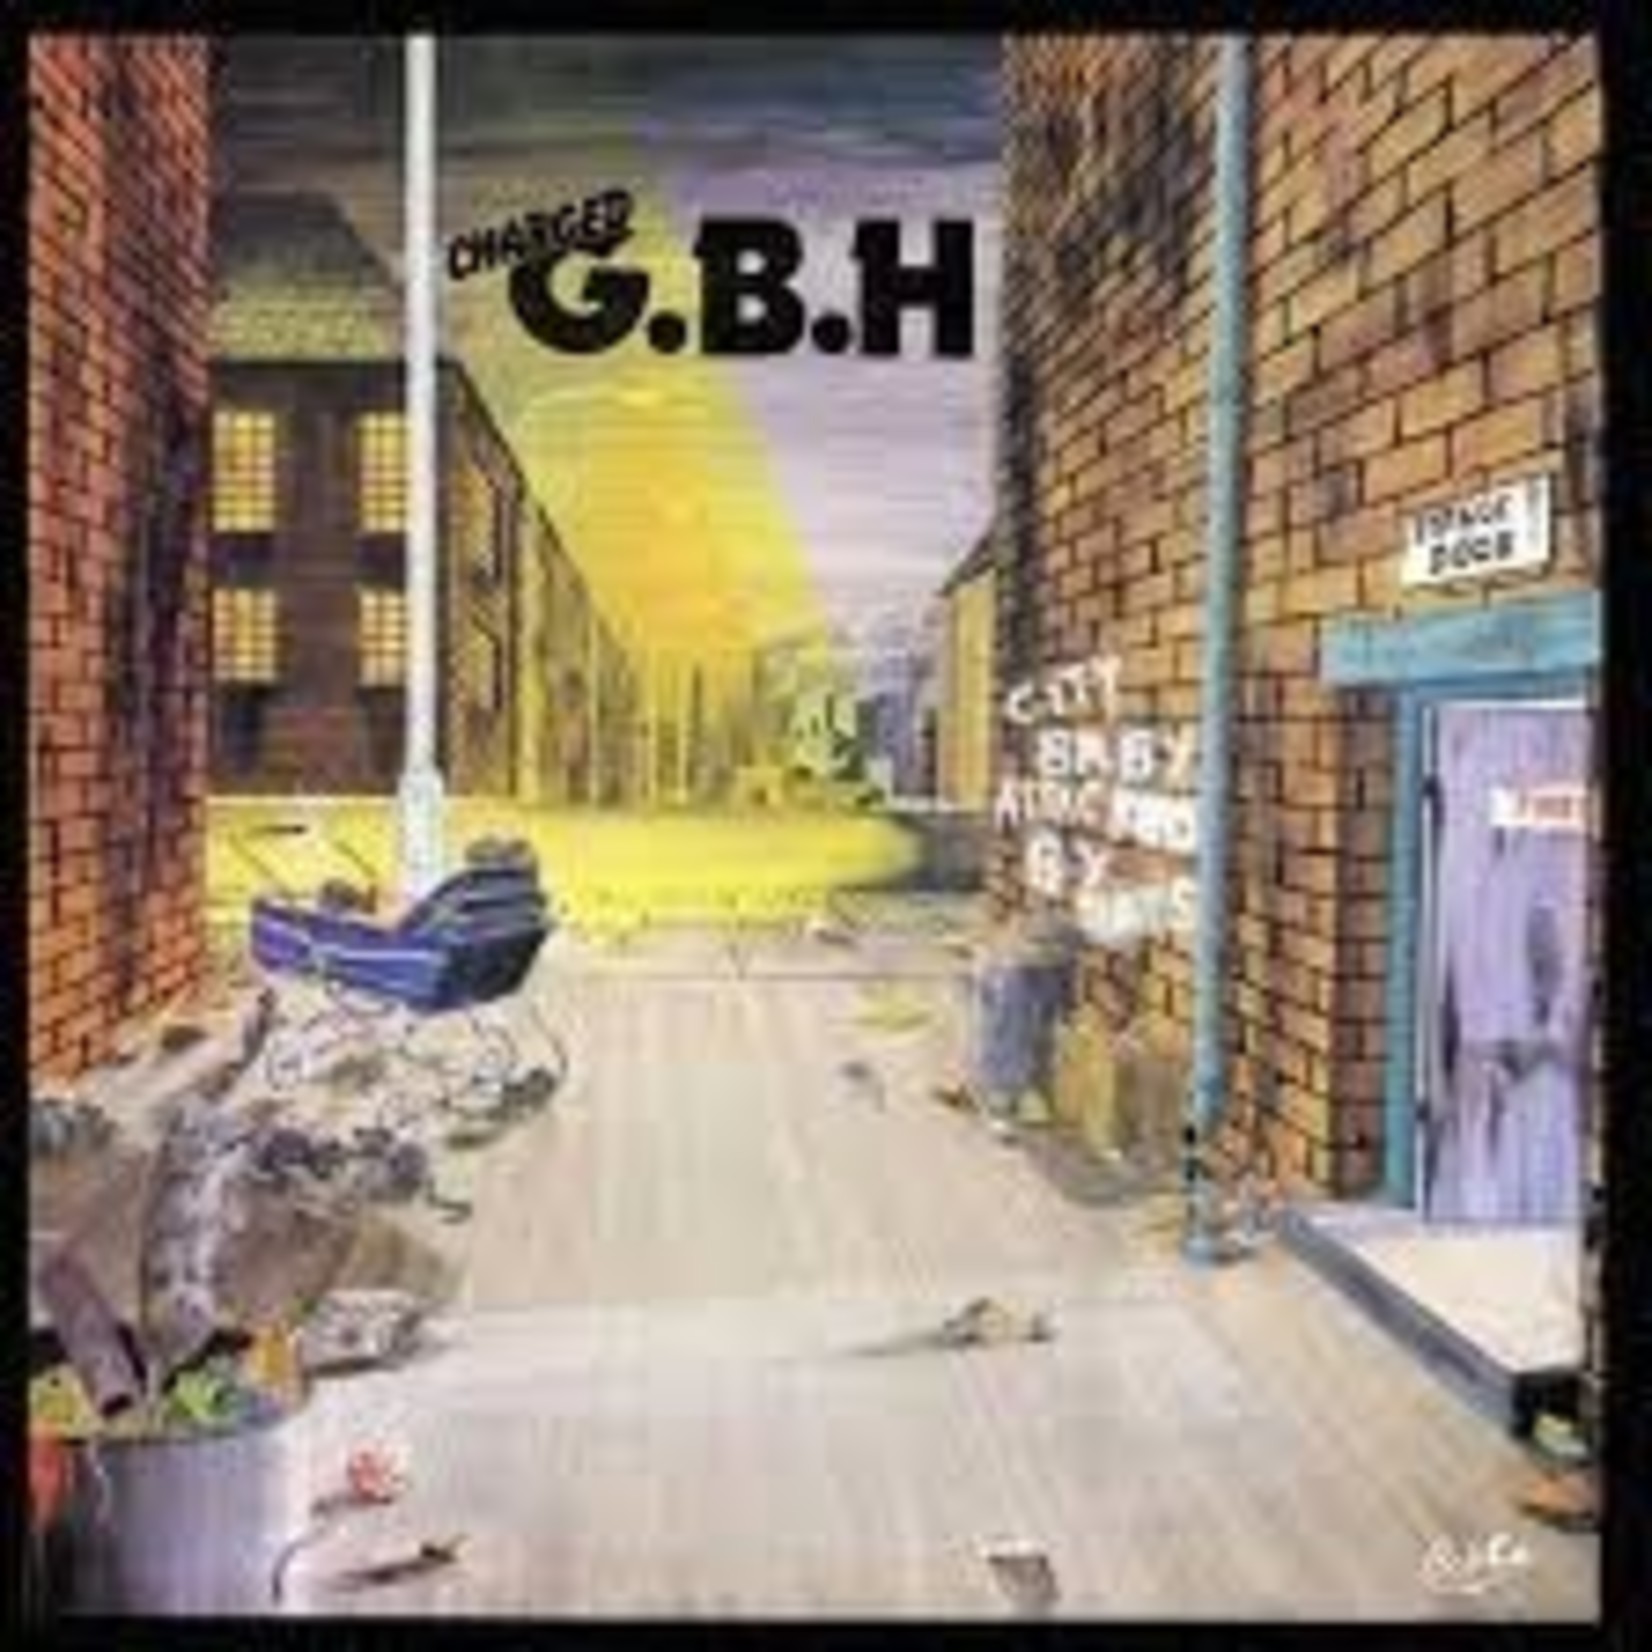 G.B.H - city baby attacked LP